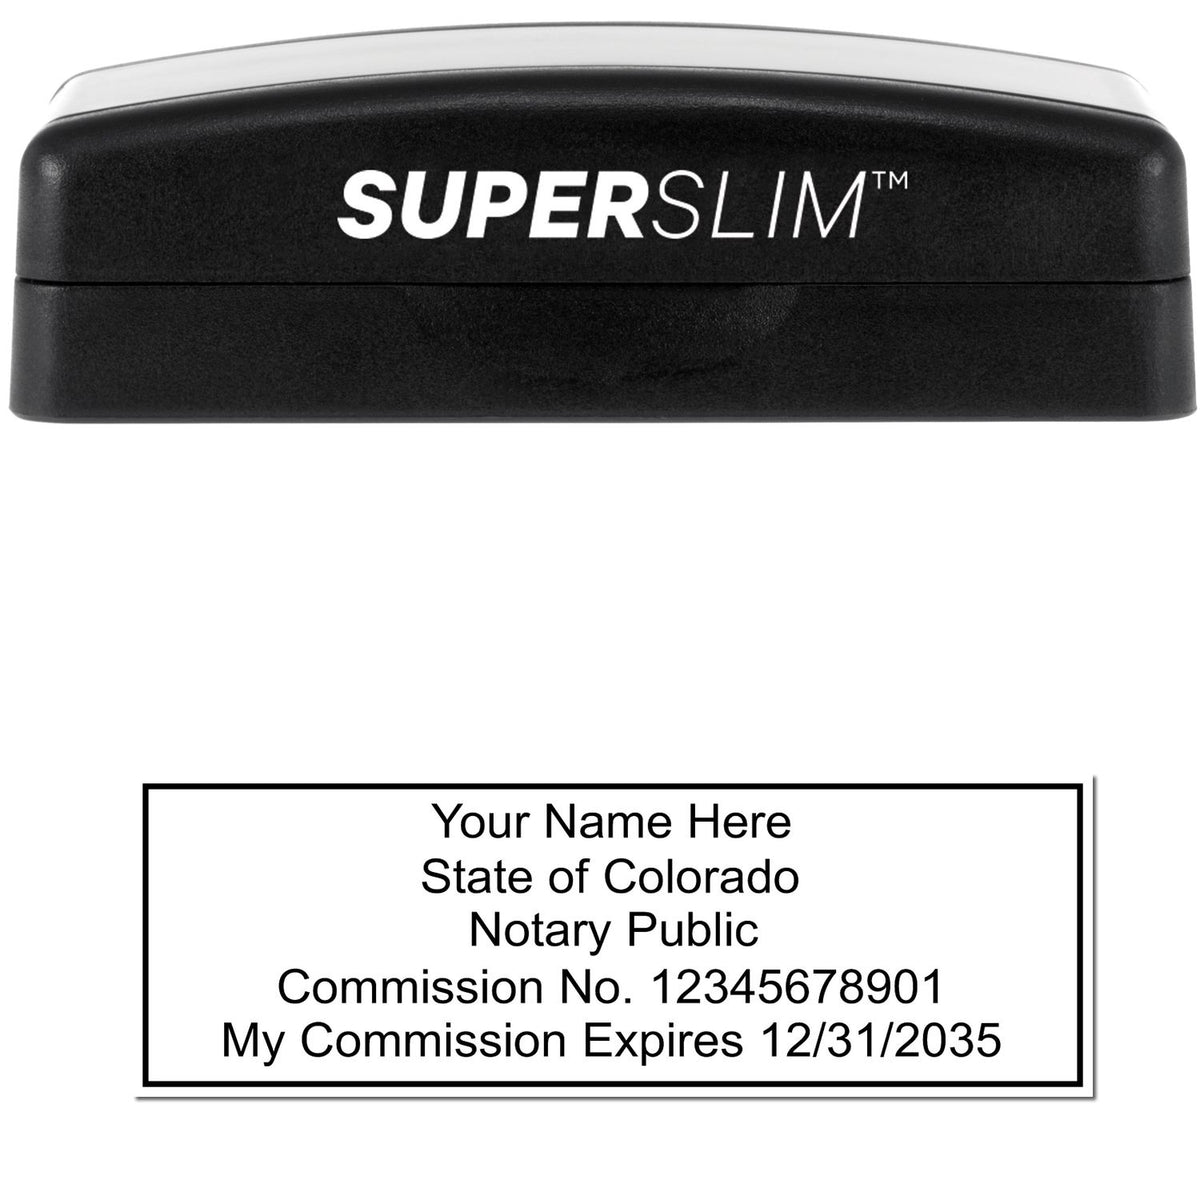 The main image for the Super Slim Colorado Notary Public Stamp depicting a sample of the imprint and electronic files